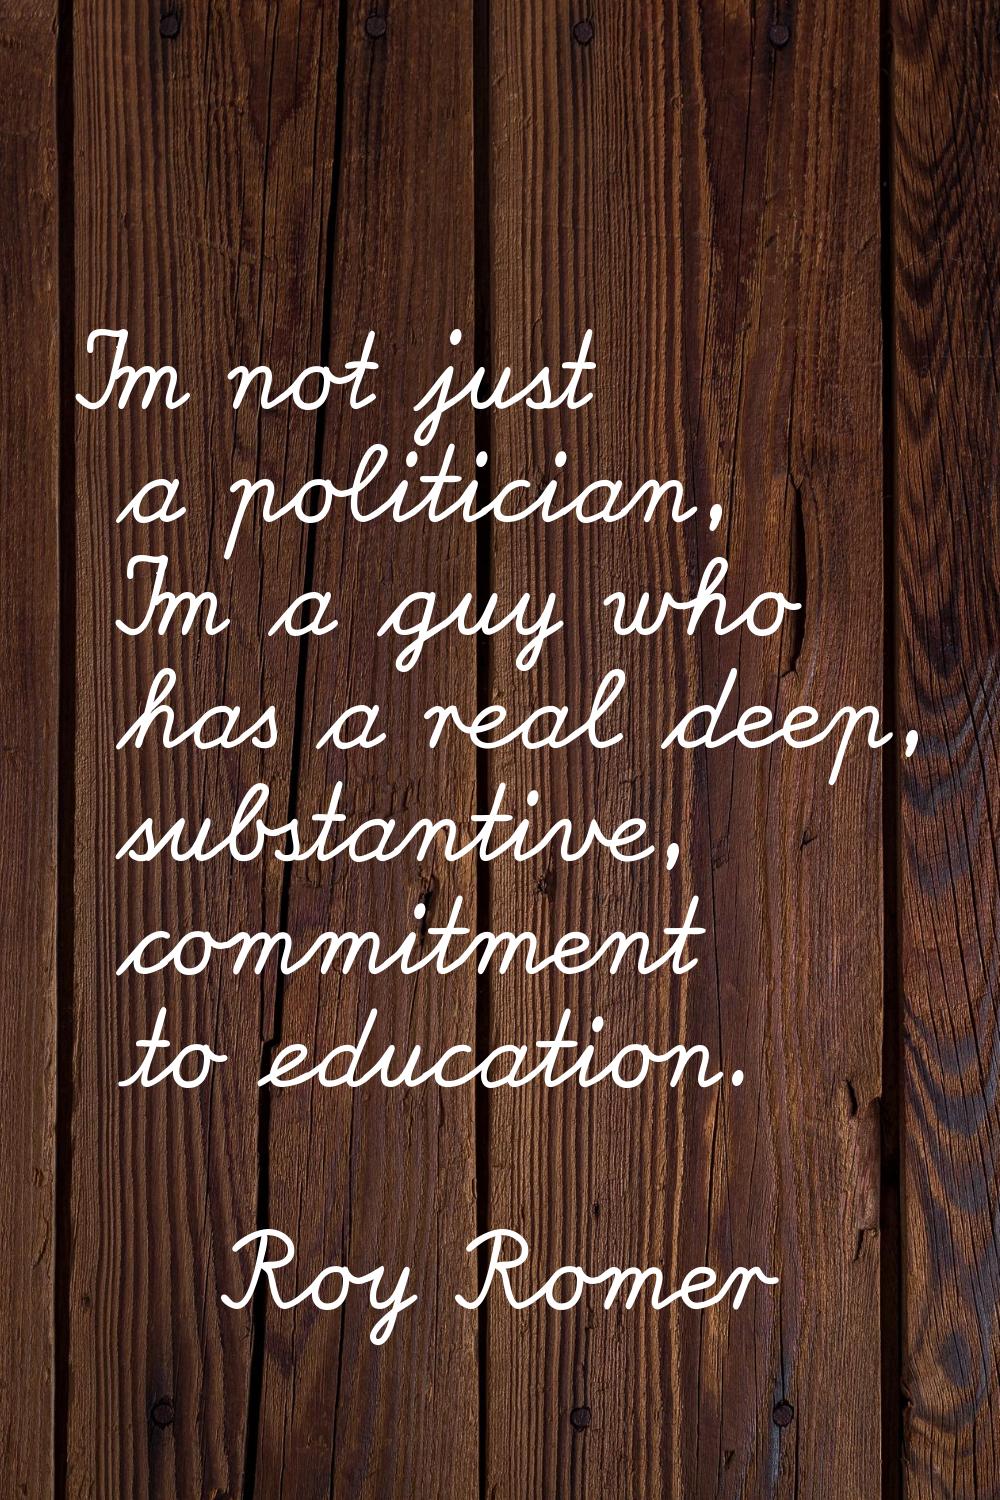 I'm not just a politician, I'm a guy who has a real deep, substantive, commitment to education.